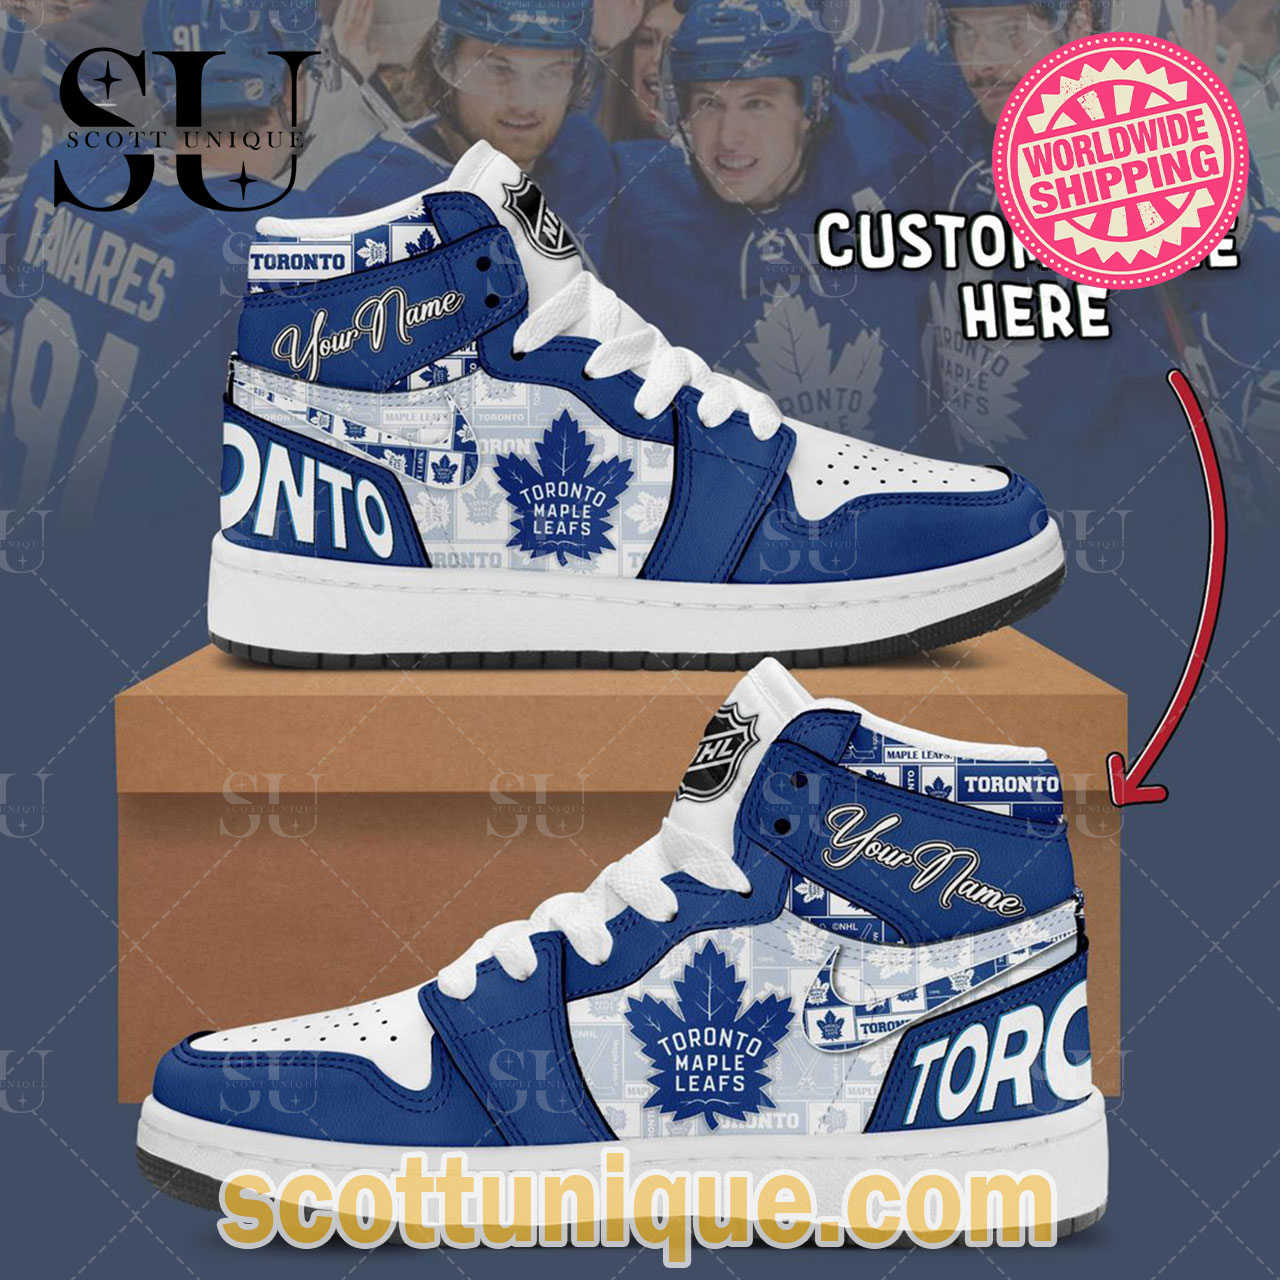 NHL Toronto Maple Leafs New Released 2023 Nike Air Jordan 1 High Top Limited